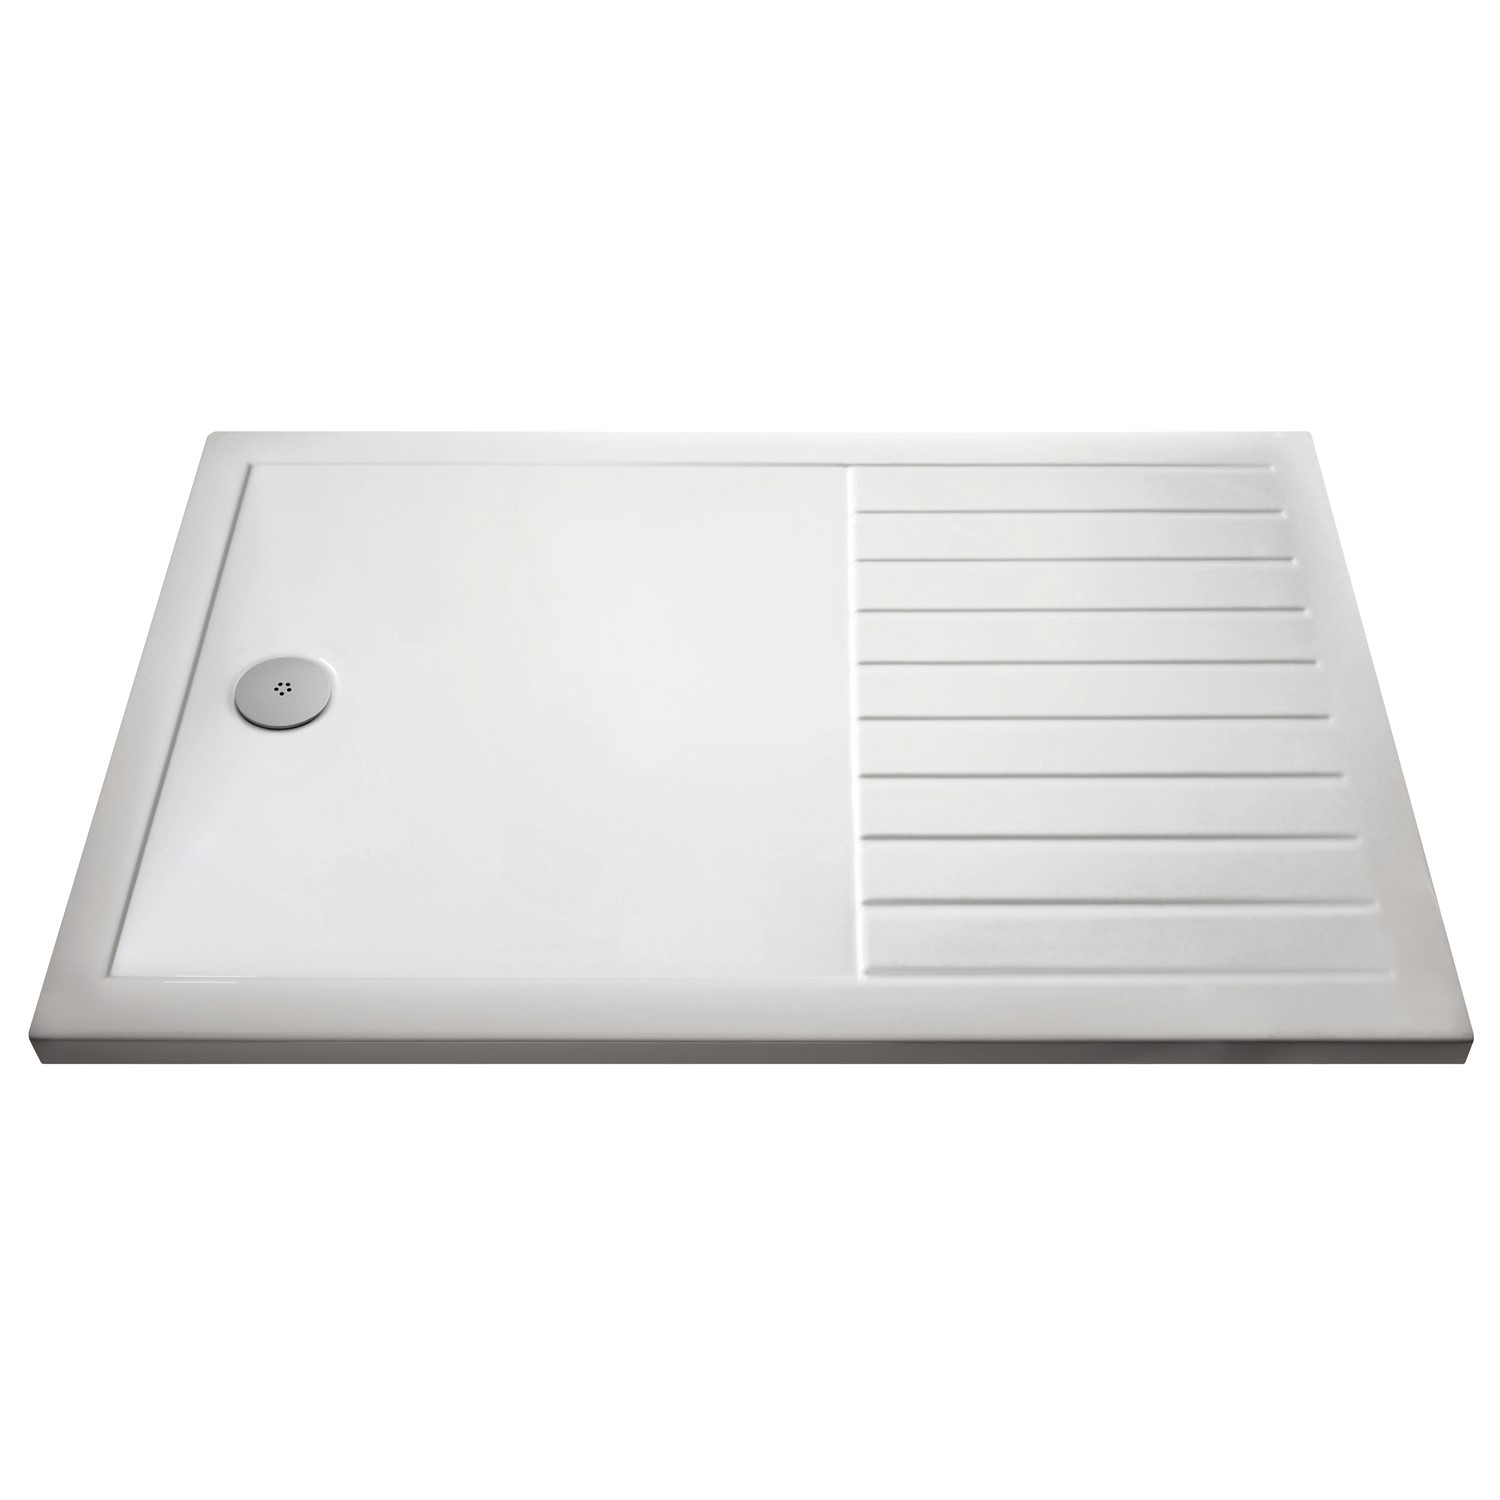 1200x900mm Tileable Rectangular Wet Room Shower Tray - Live Your Colour -  Better Bathrooms